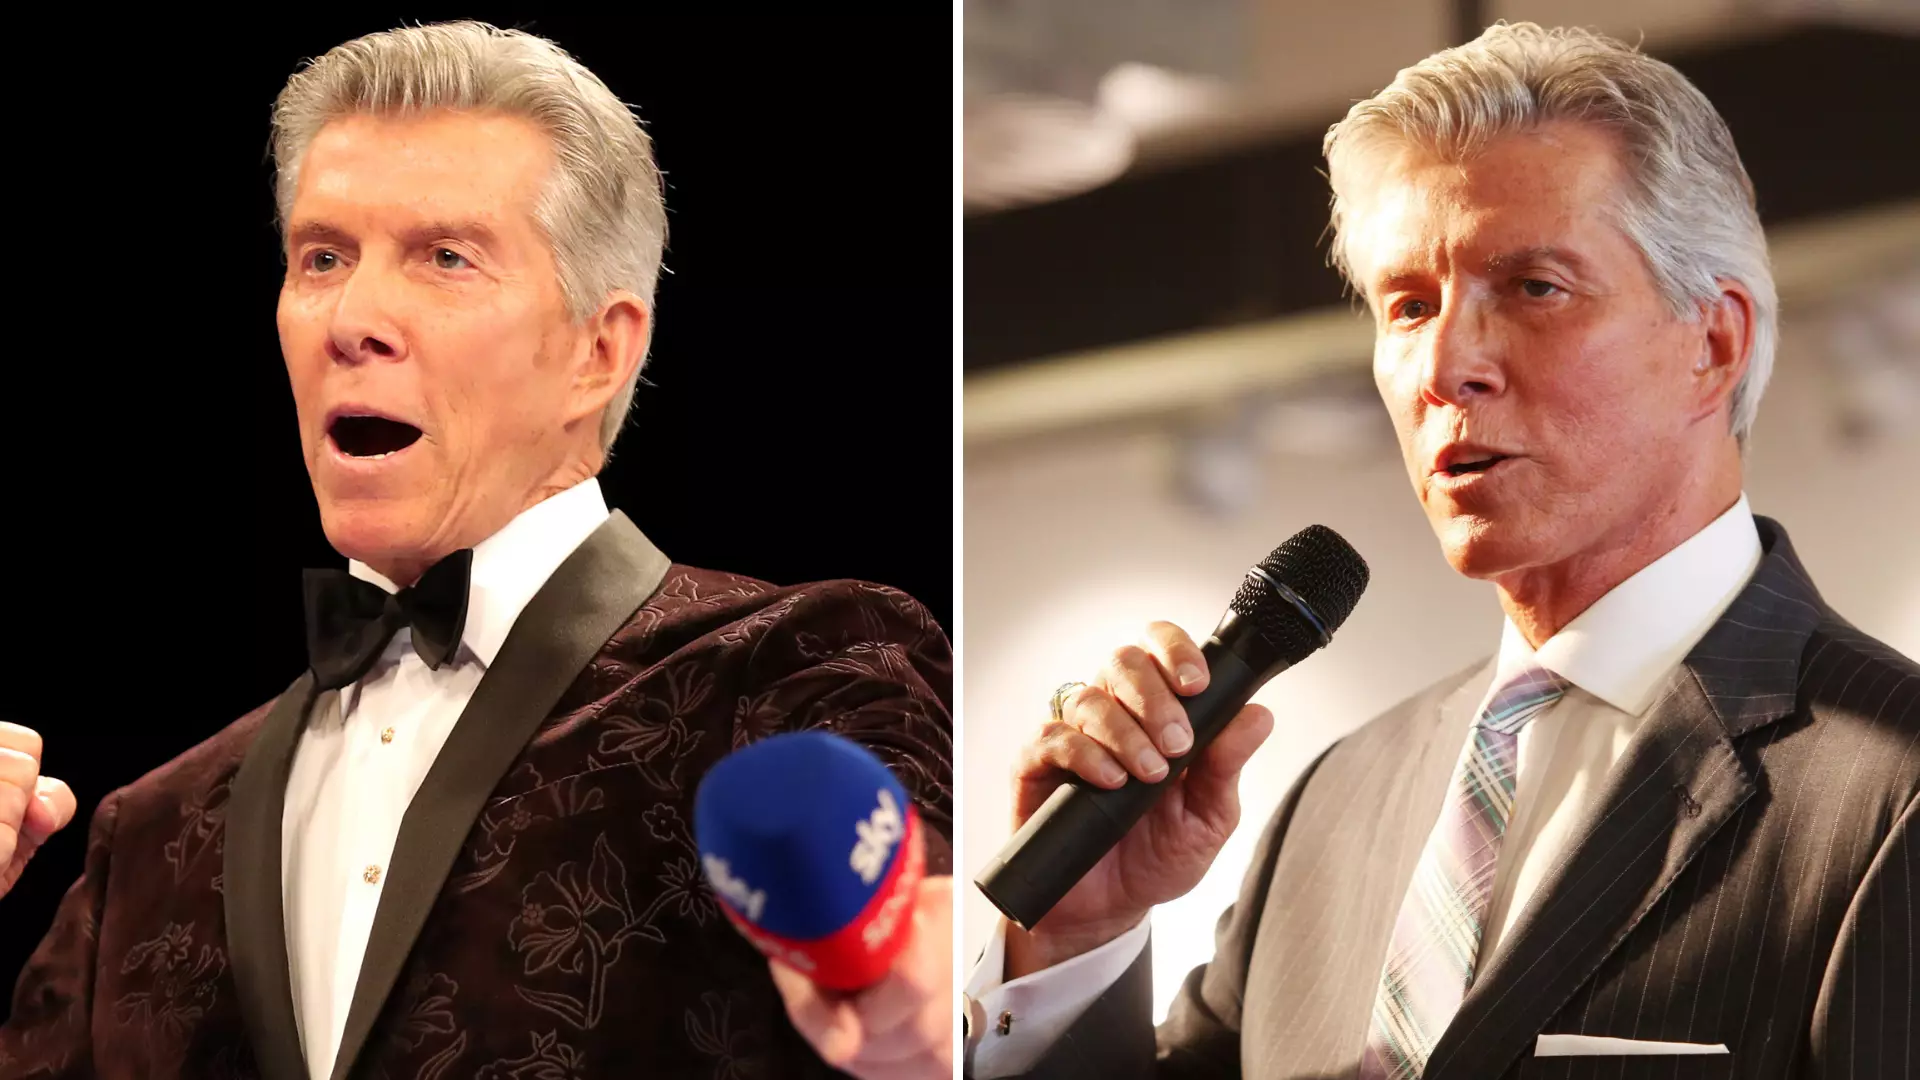 The Staggering Amount Of Money That Michael Buffer Is Said To Earn Per Fight